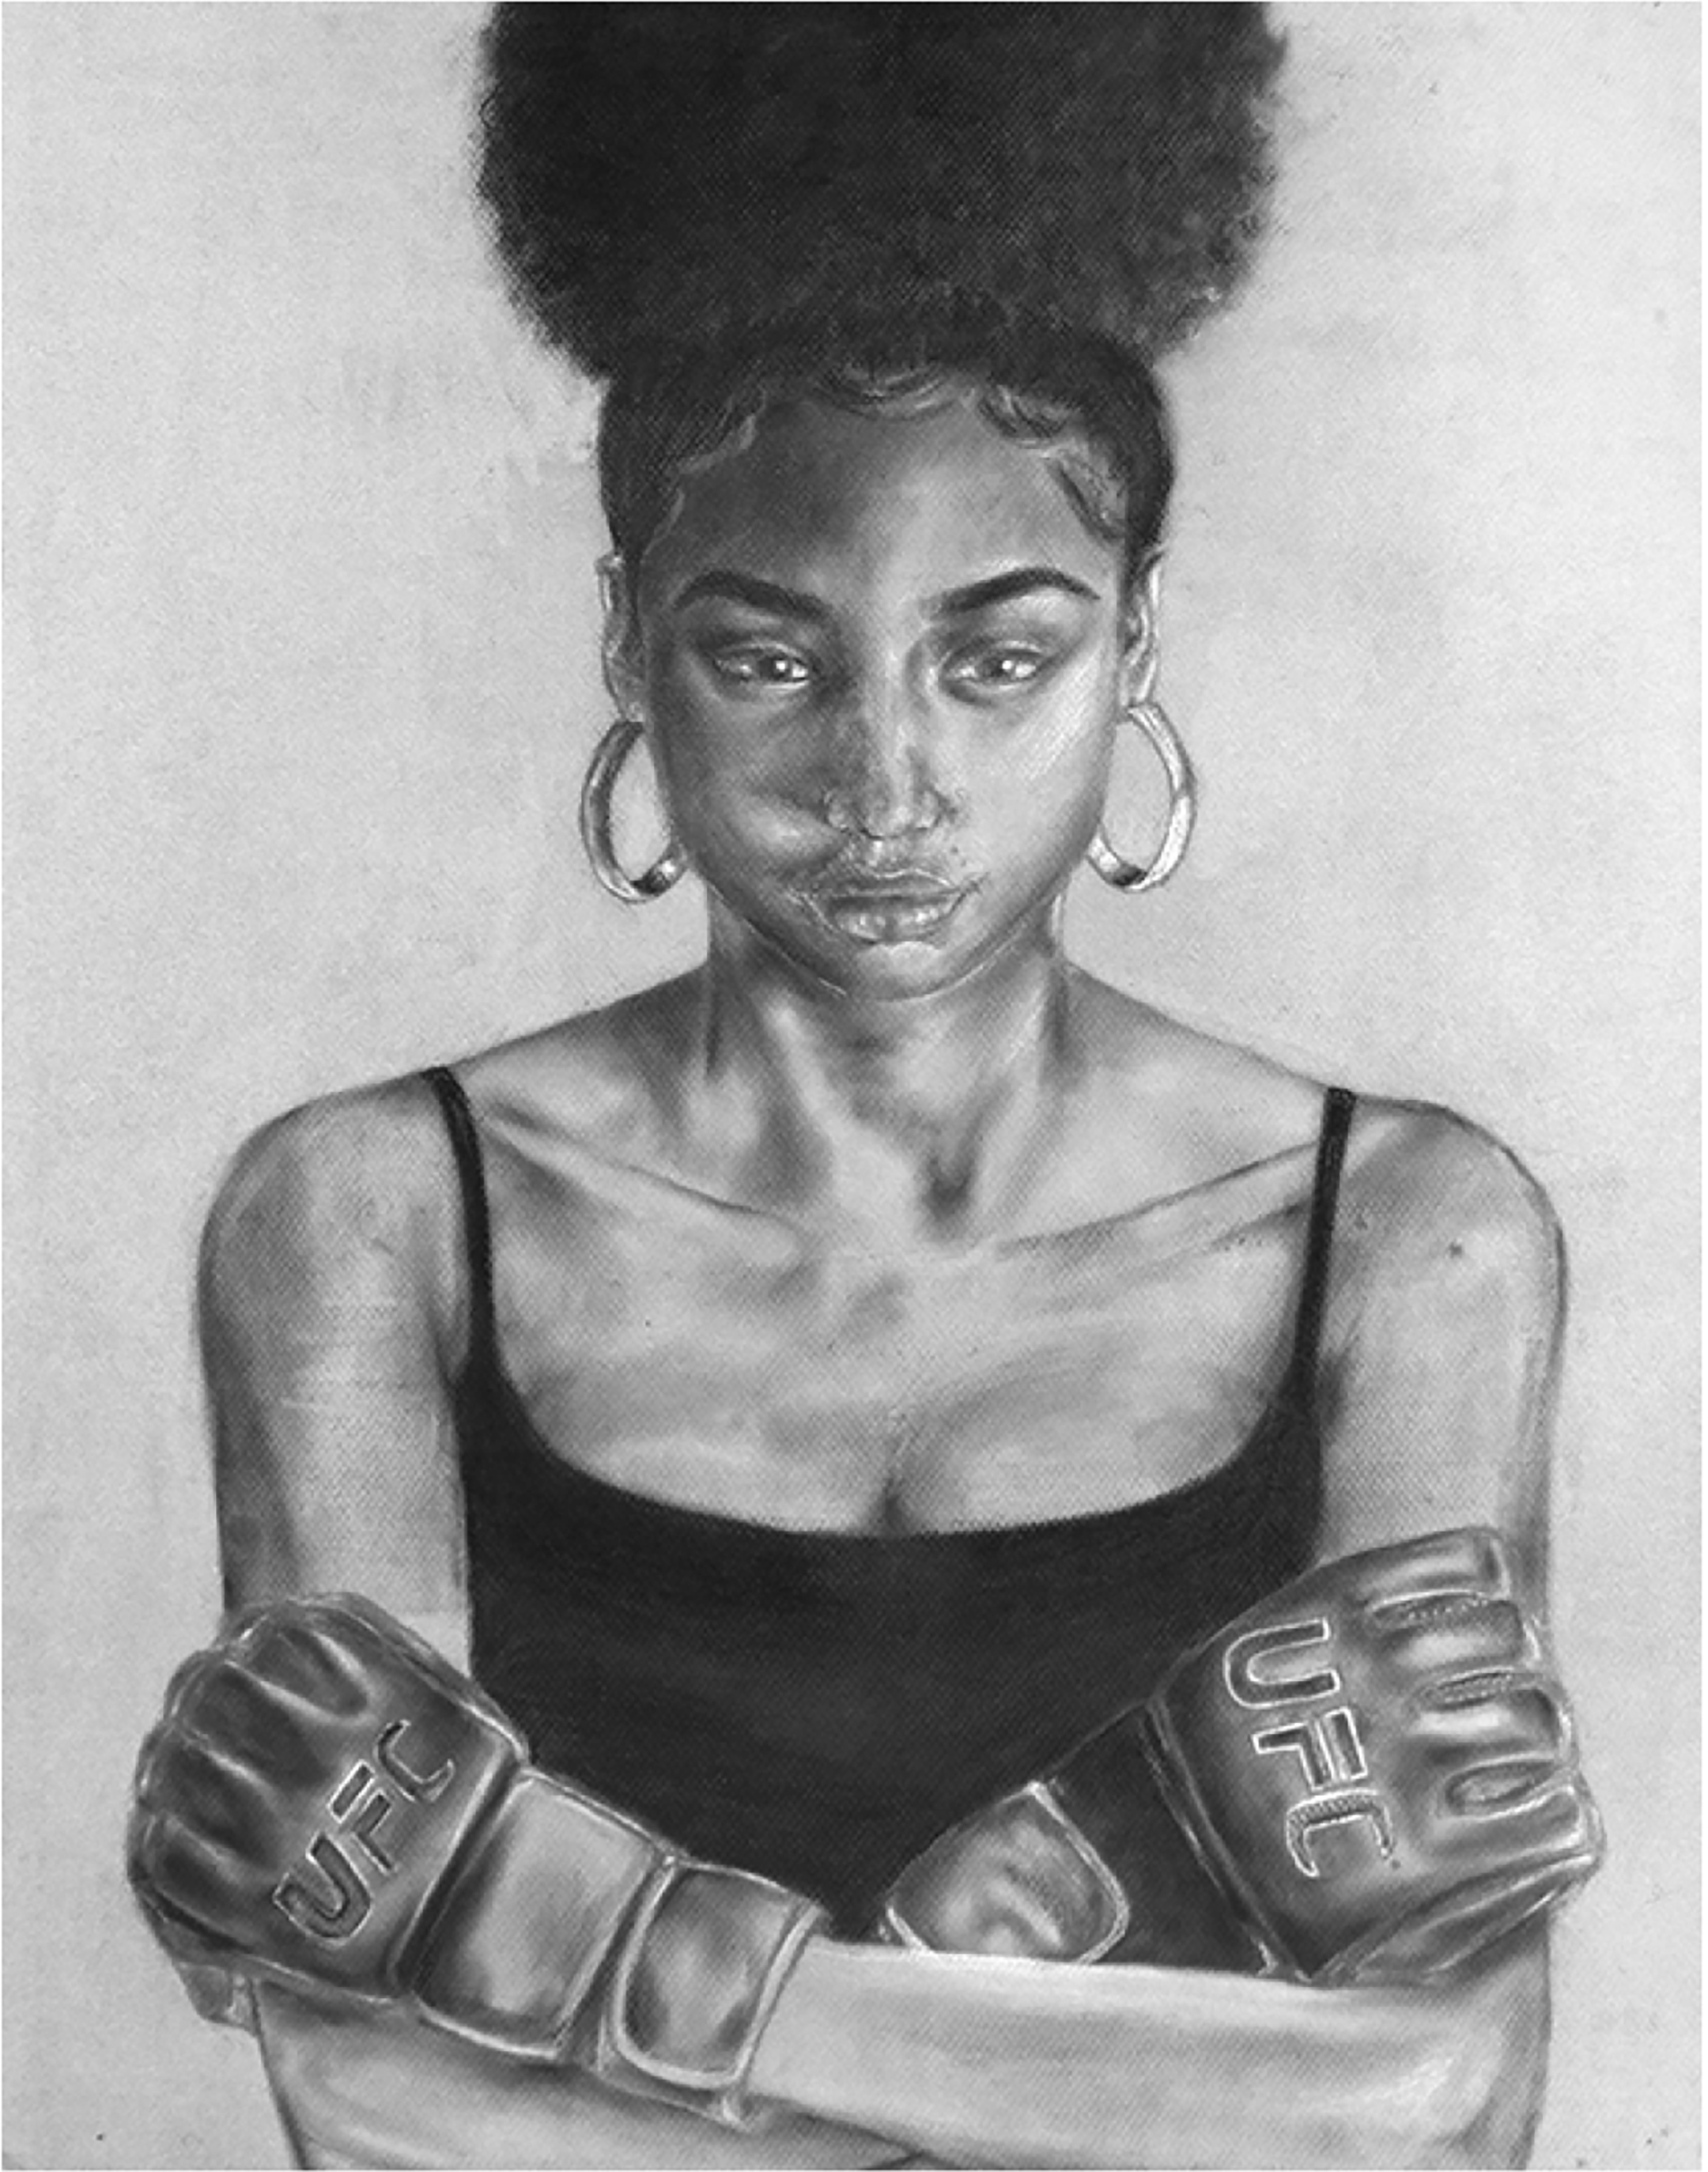 Black and white self-portrait of the artist from the waist up, a young black woman, wearing a tank top with her arms folded and boxing gloves on her hands